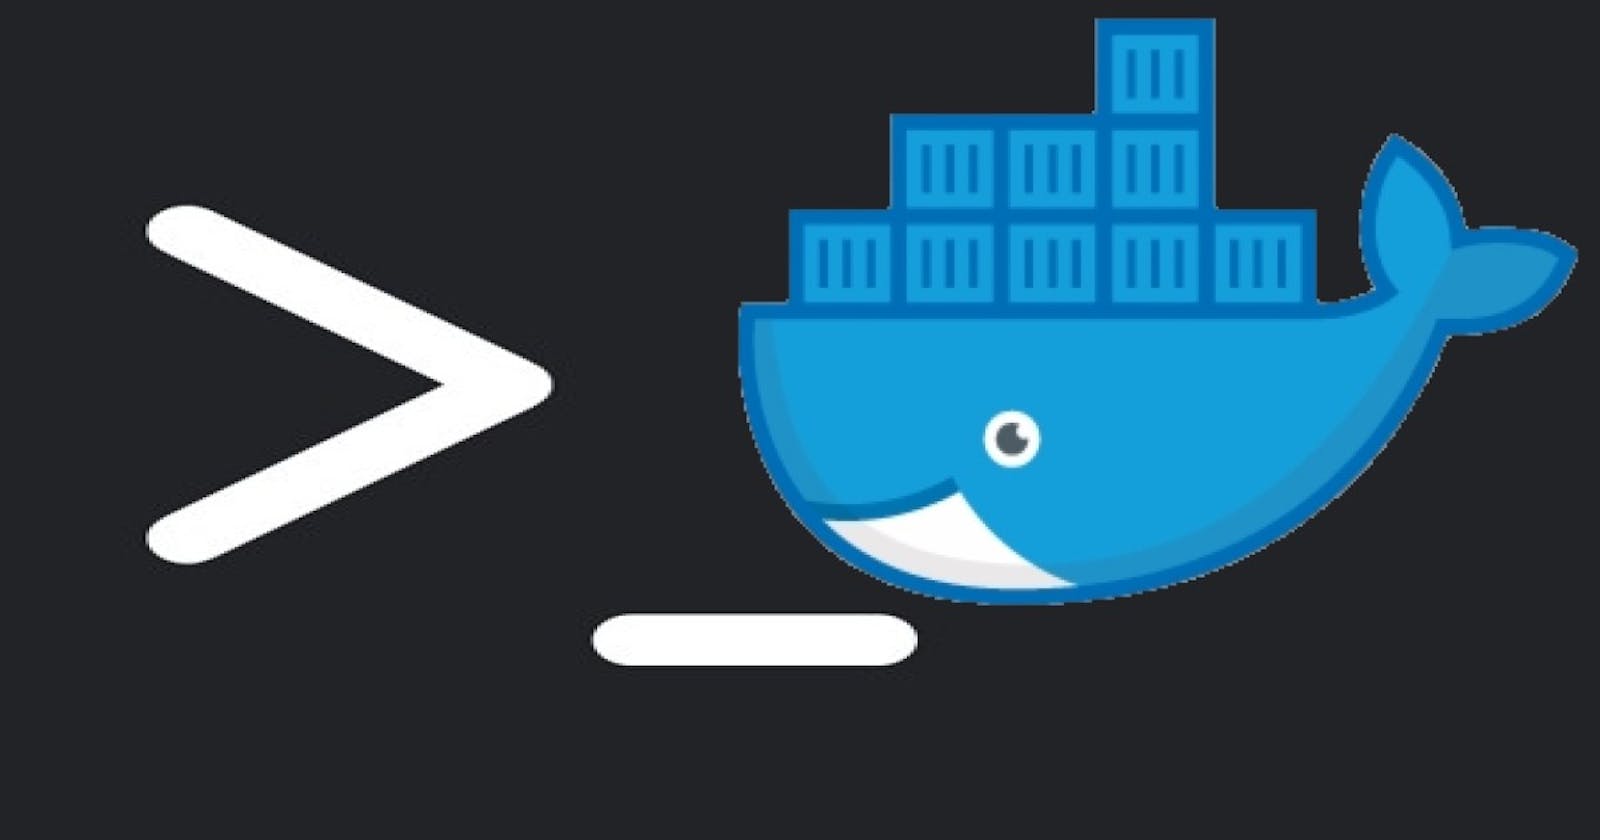 10 popular commands to get started with Docker